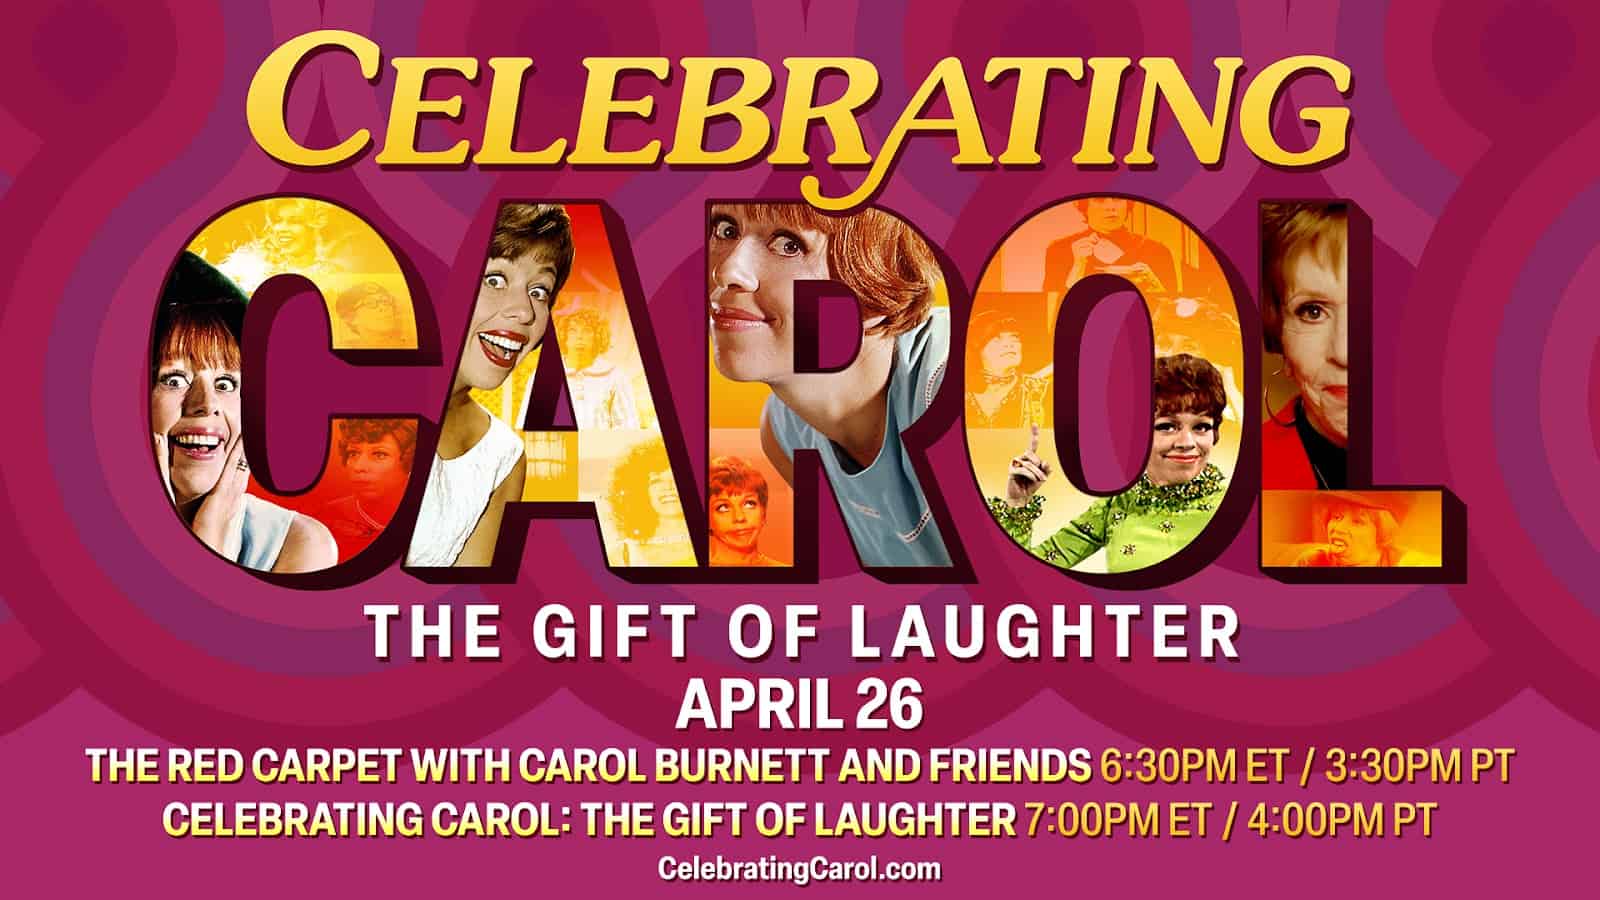 Shout! Factory TV Honors Carol Burnett with Exclusive Streaming Event. Did you watch? 19